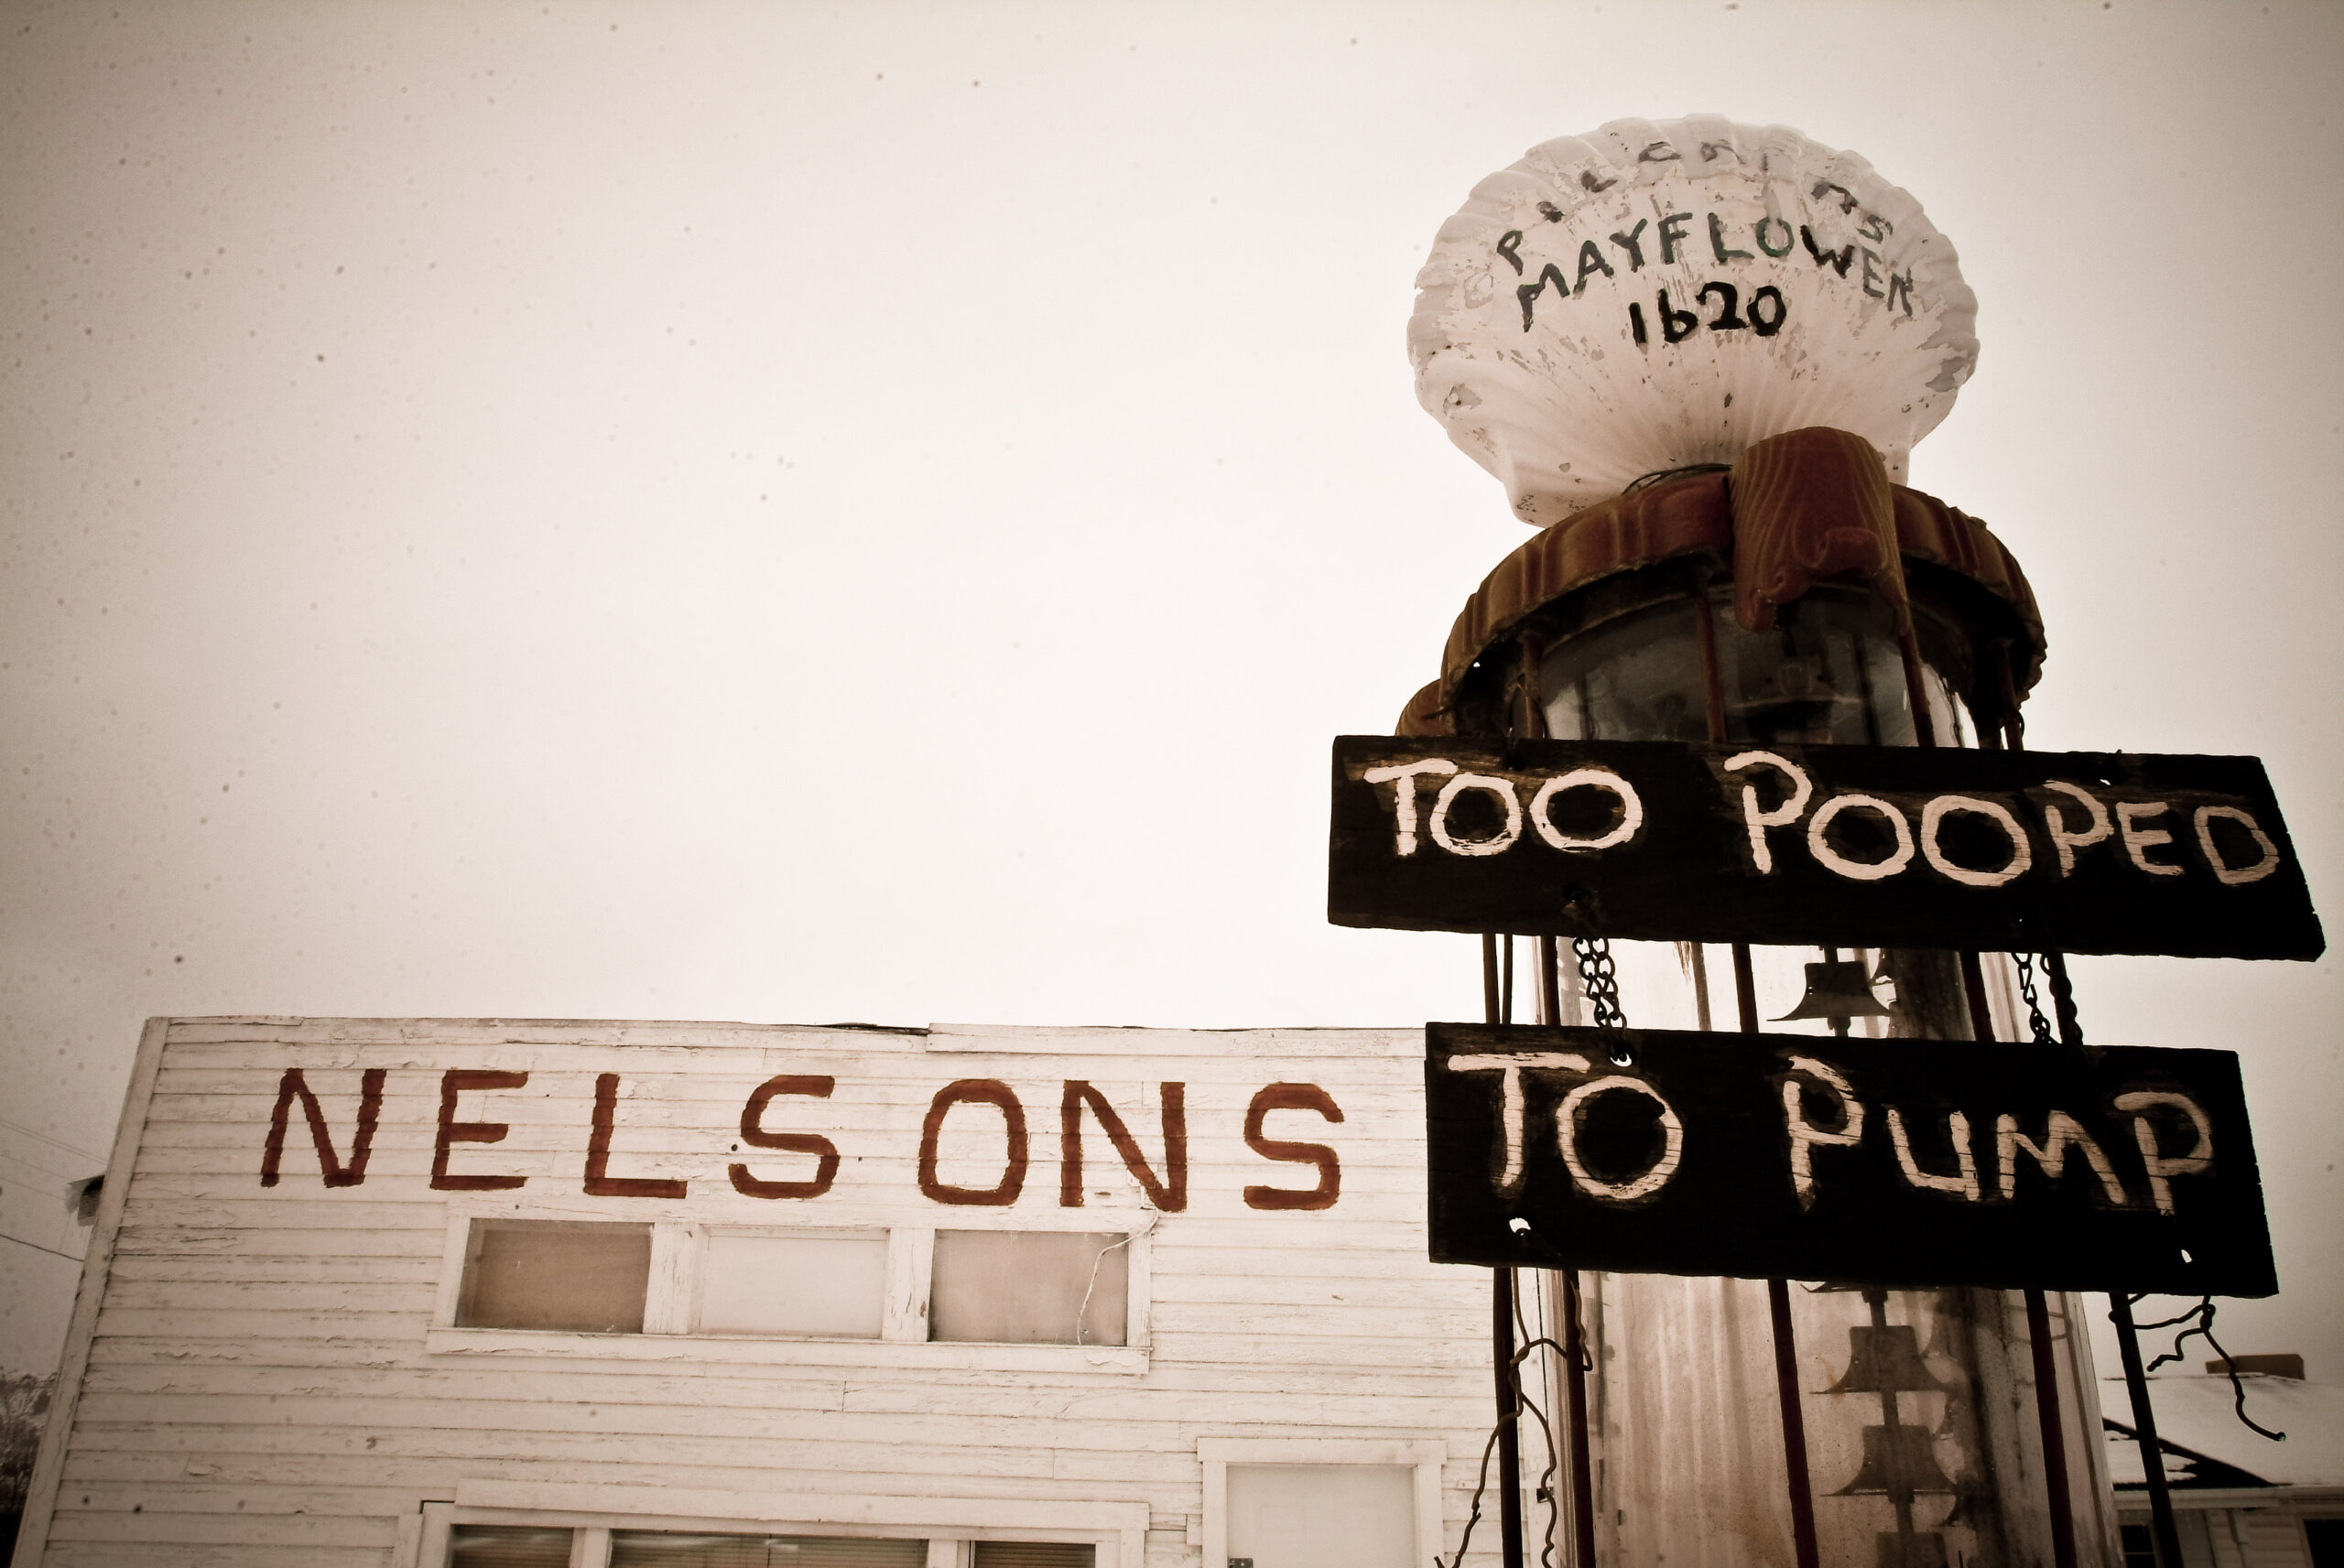 An abandoned gas station displays its operator's feelings, "Too pooped to pump"